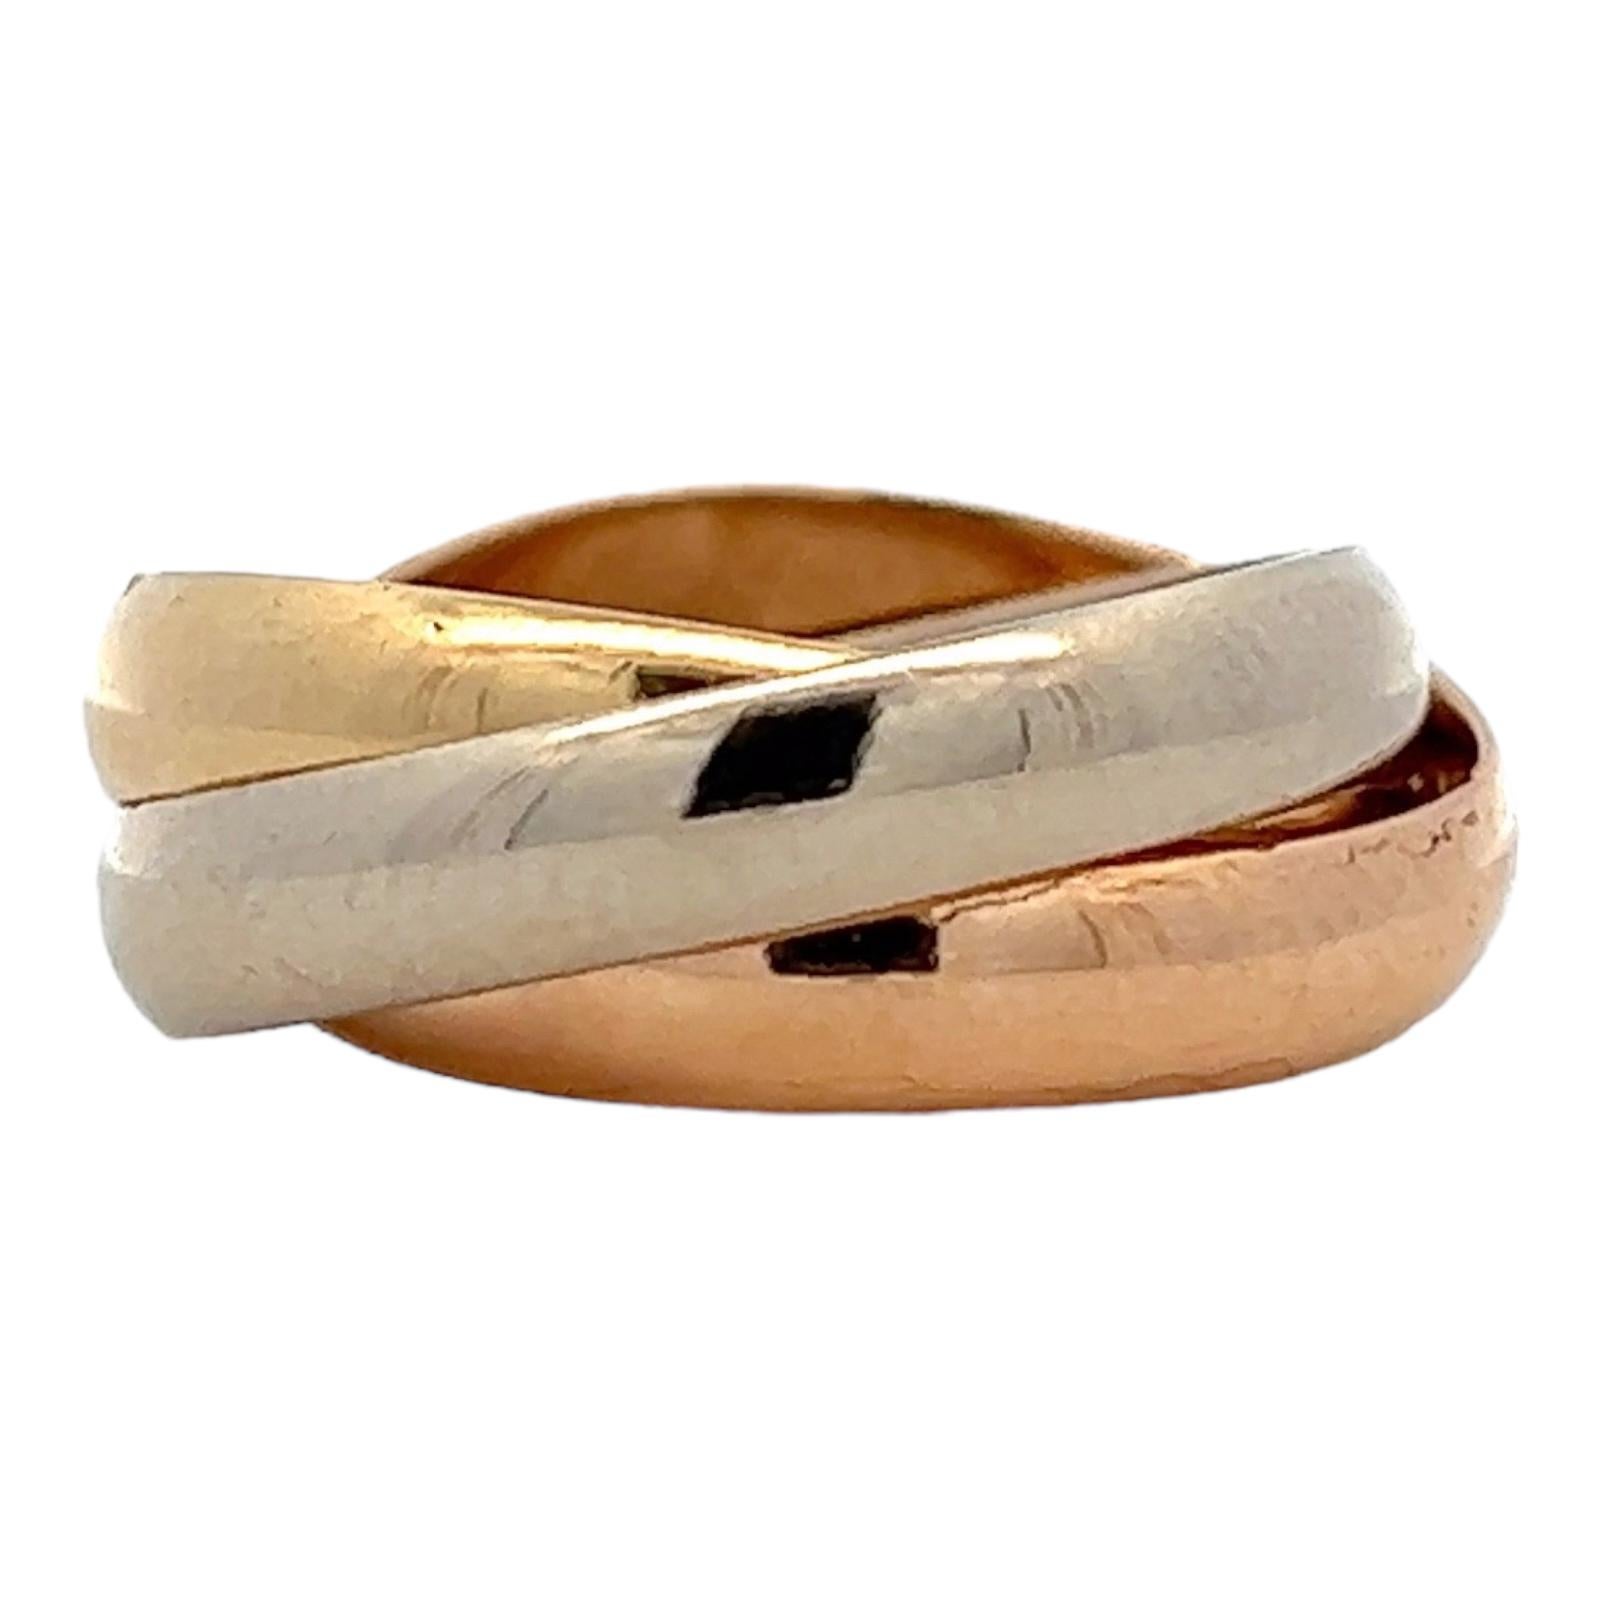 Iconic Cartier Trinity Rolling Ring crafted in 18 karat yellow, white, and rose gold. The ring is size 50 ( US size 5). Signed Cartier, les must de Cartier, numbered, and hallmarked. 